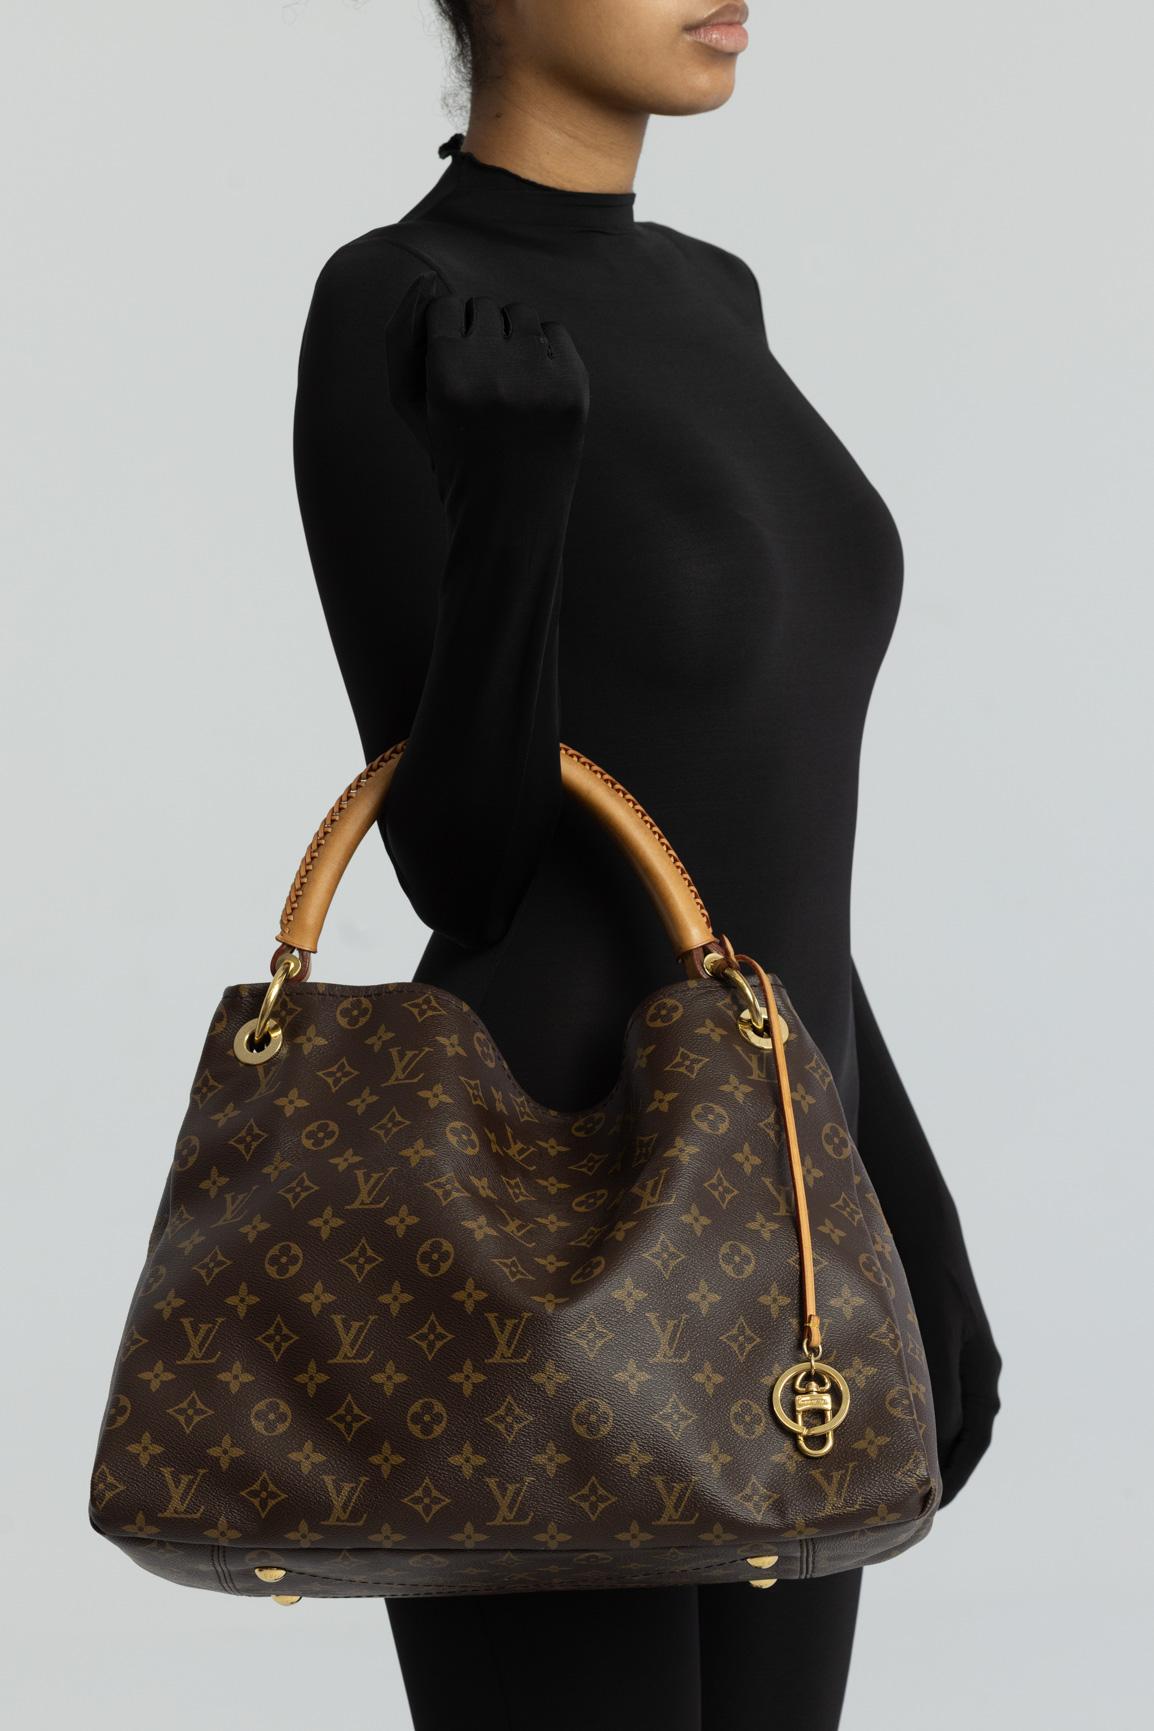 LV Artsy MM. This large tote is made of Louis monogram coated toile canvas. with leather finishes. The bag features a natural vachetta cowhide rolled leather handle with a sleek braided accent, an open, an ivory microfiber interior and an interior